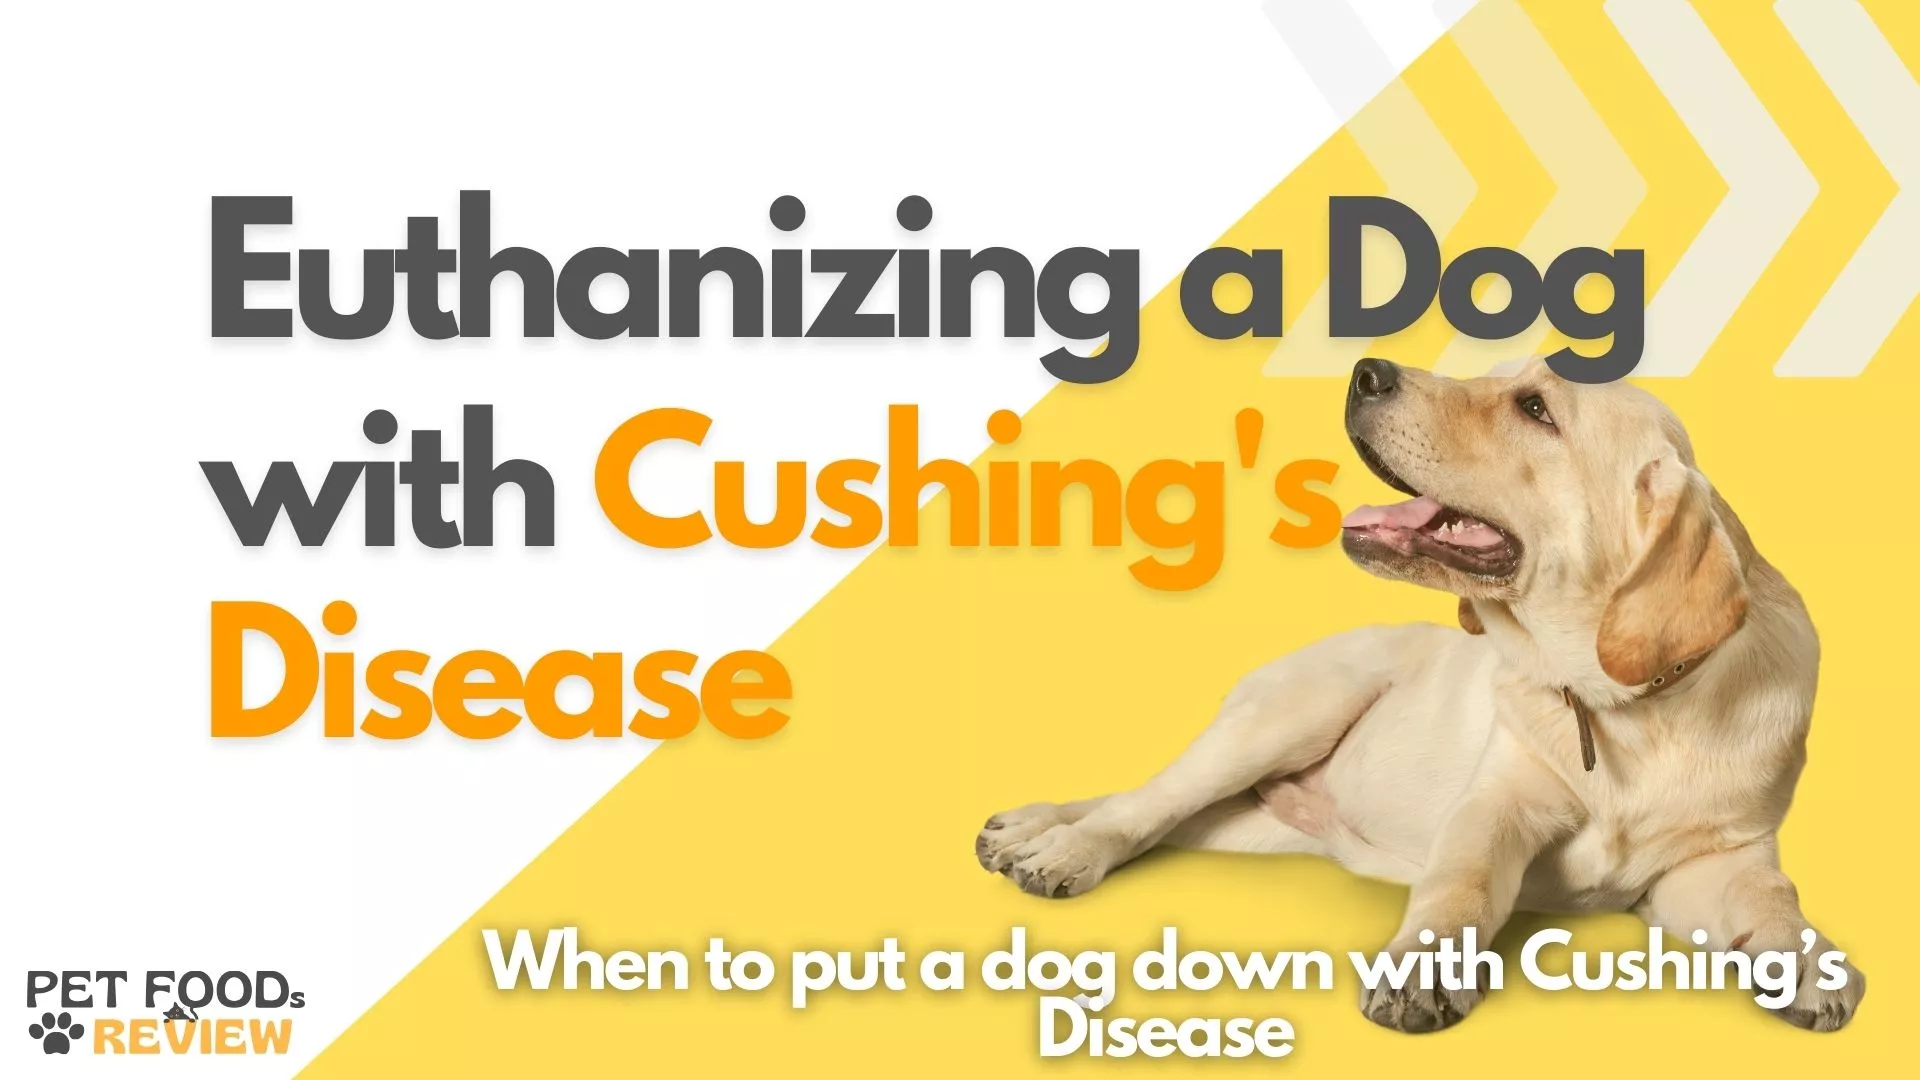 When to put a dog down with Cushing’s Disease